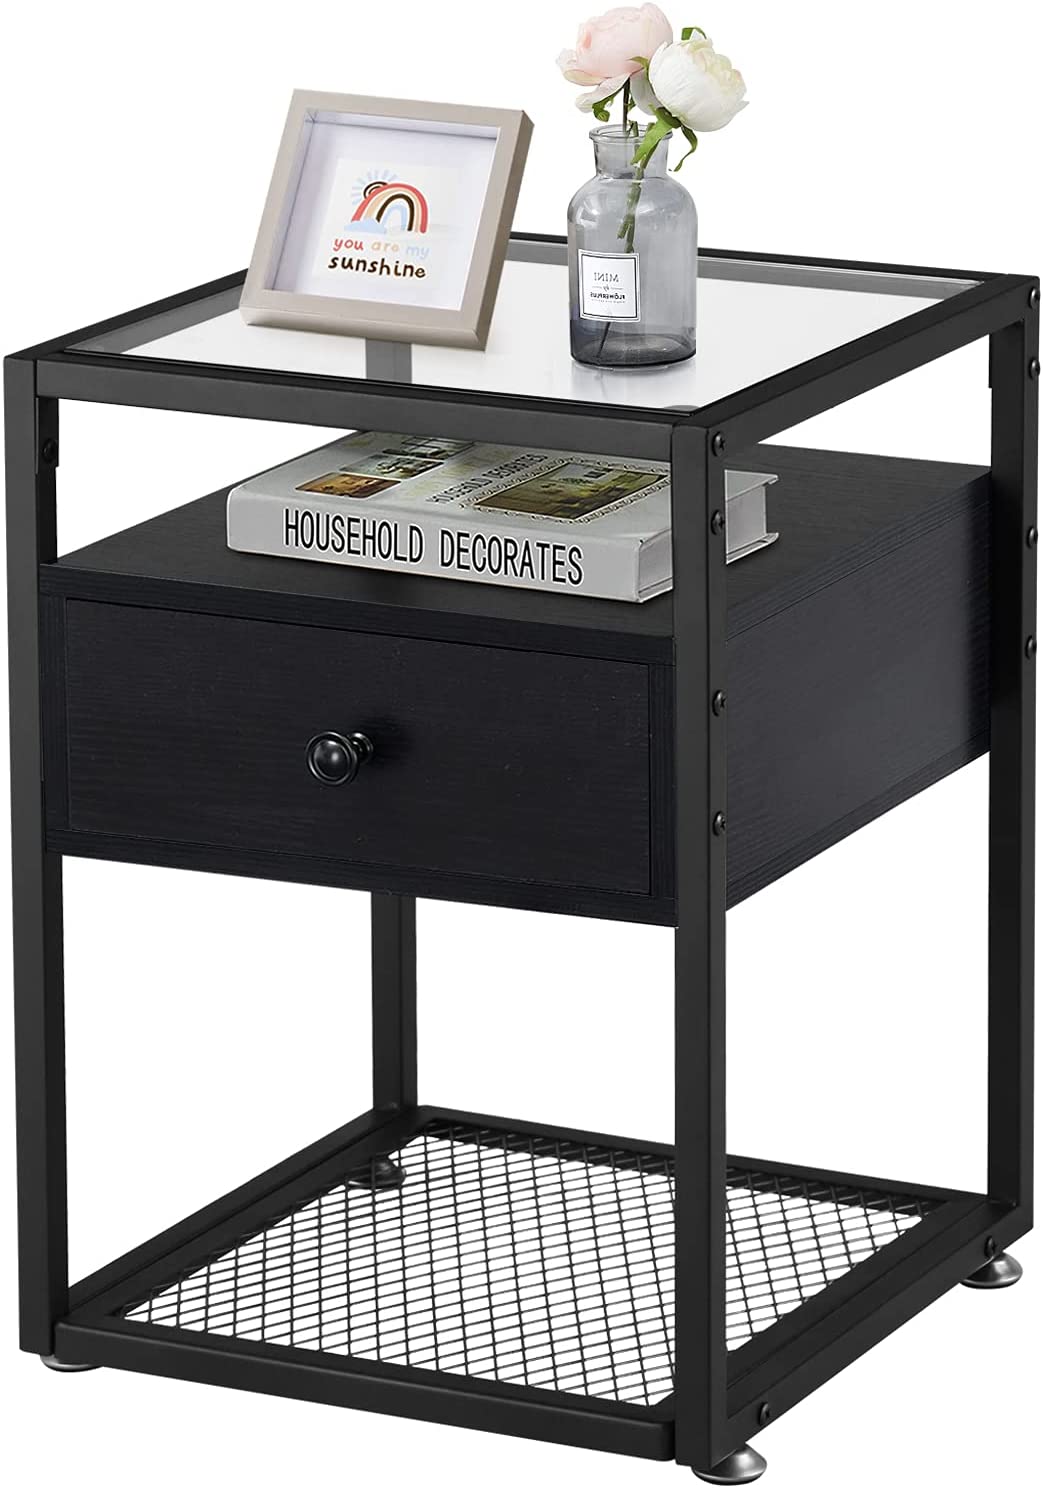 VECELO Tempered Glass Top Nightstand/End Table with Flip Drawer/Open Storage/Stable Steel Frame for Living Room, Bedroom